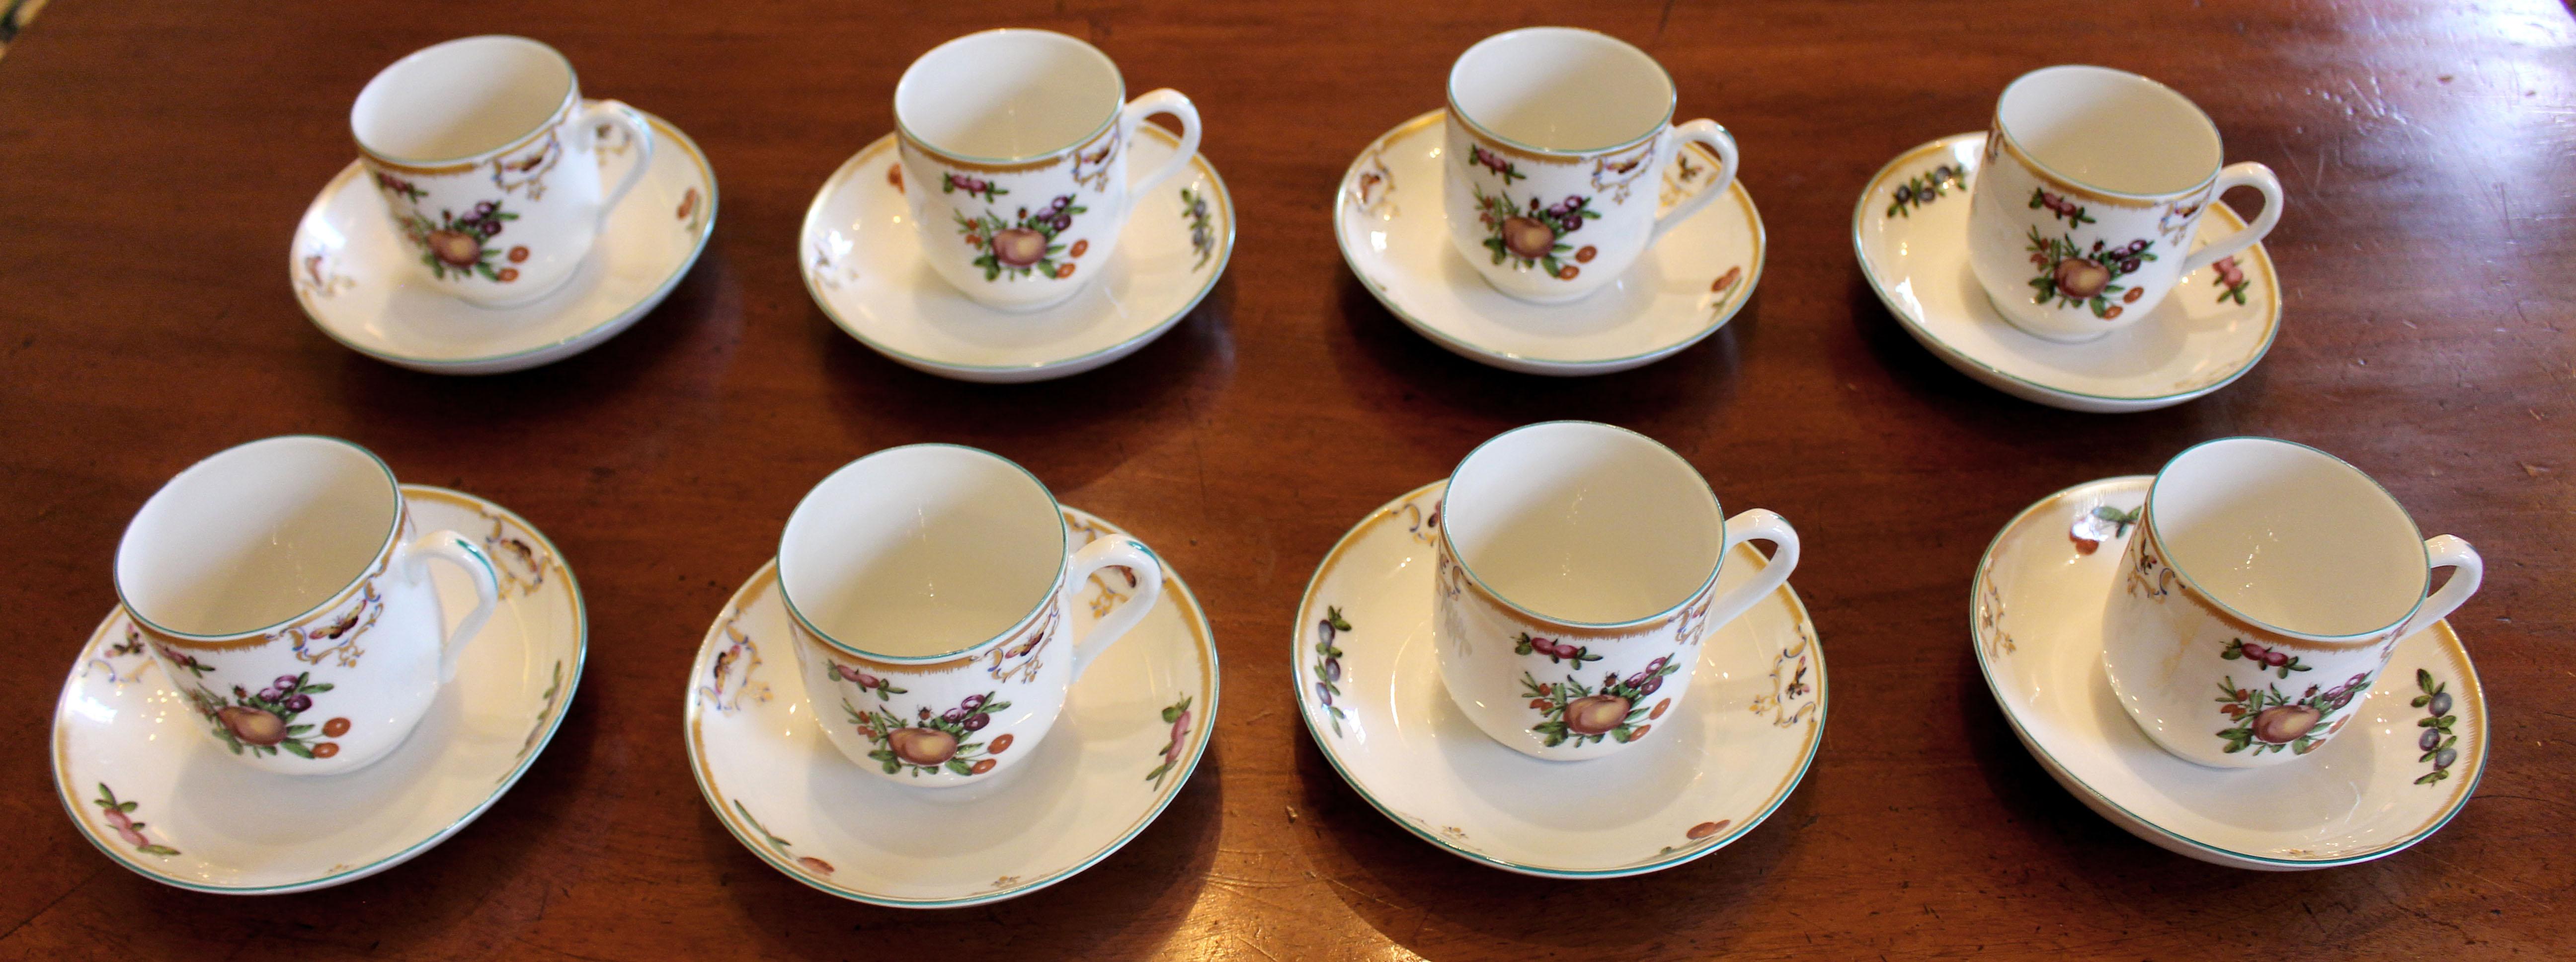 Porcelain China Service for Eight, 